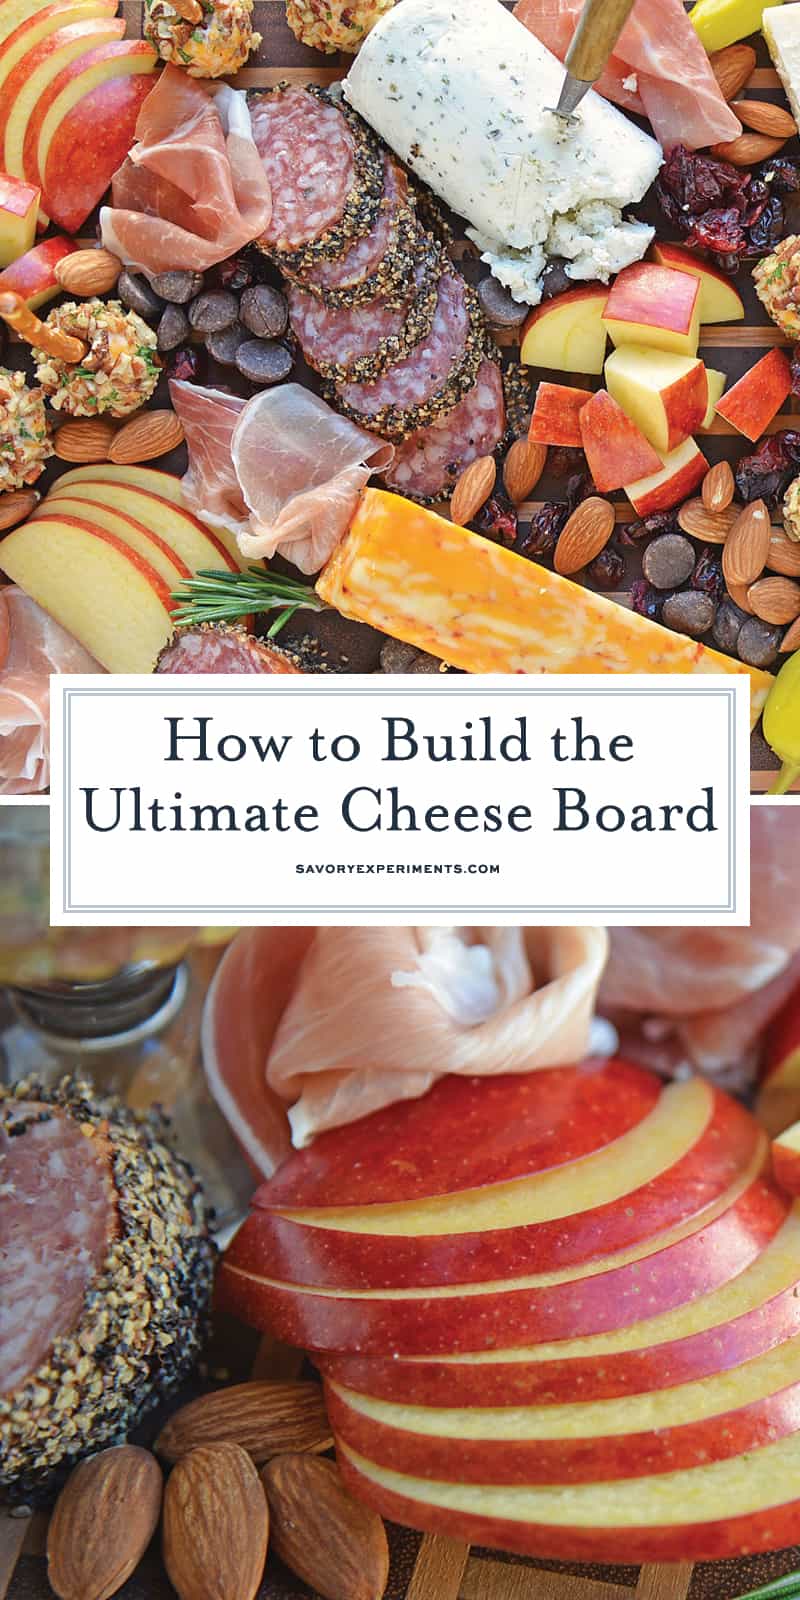 Tips for building the ultimate cheese board, the perfect easy party appetizer that requires no cooking! Ideas for meat, cheese and accompaniments. #cheeseboard #cheeseplatter www.savoryexperiments.com 